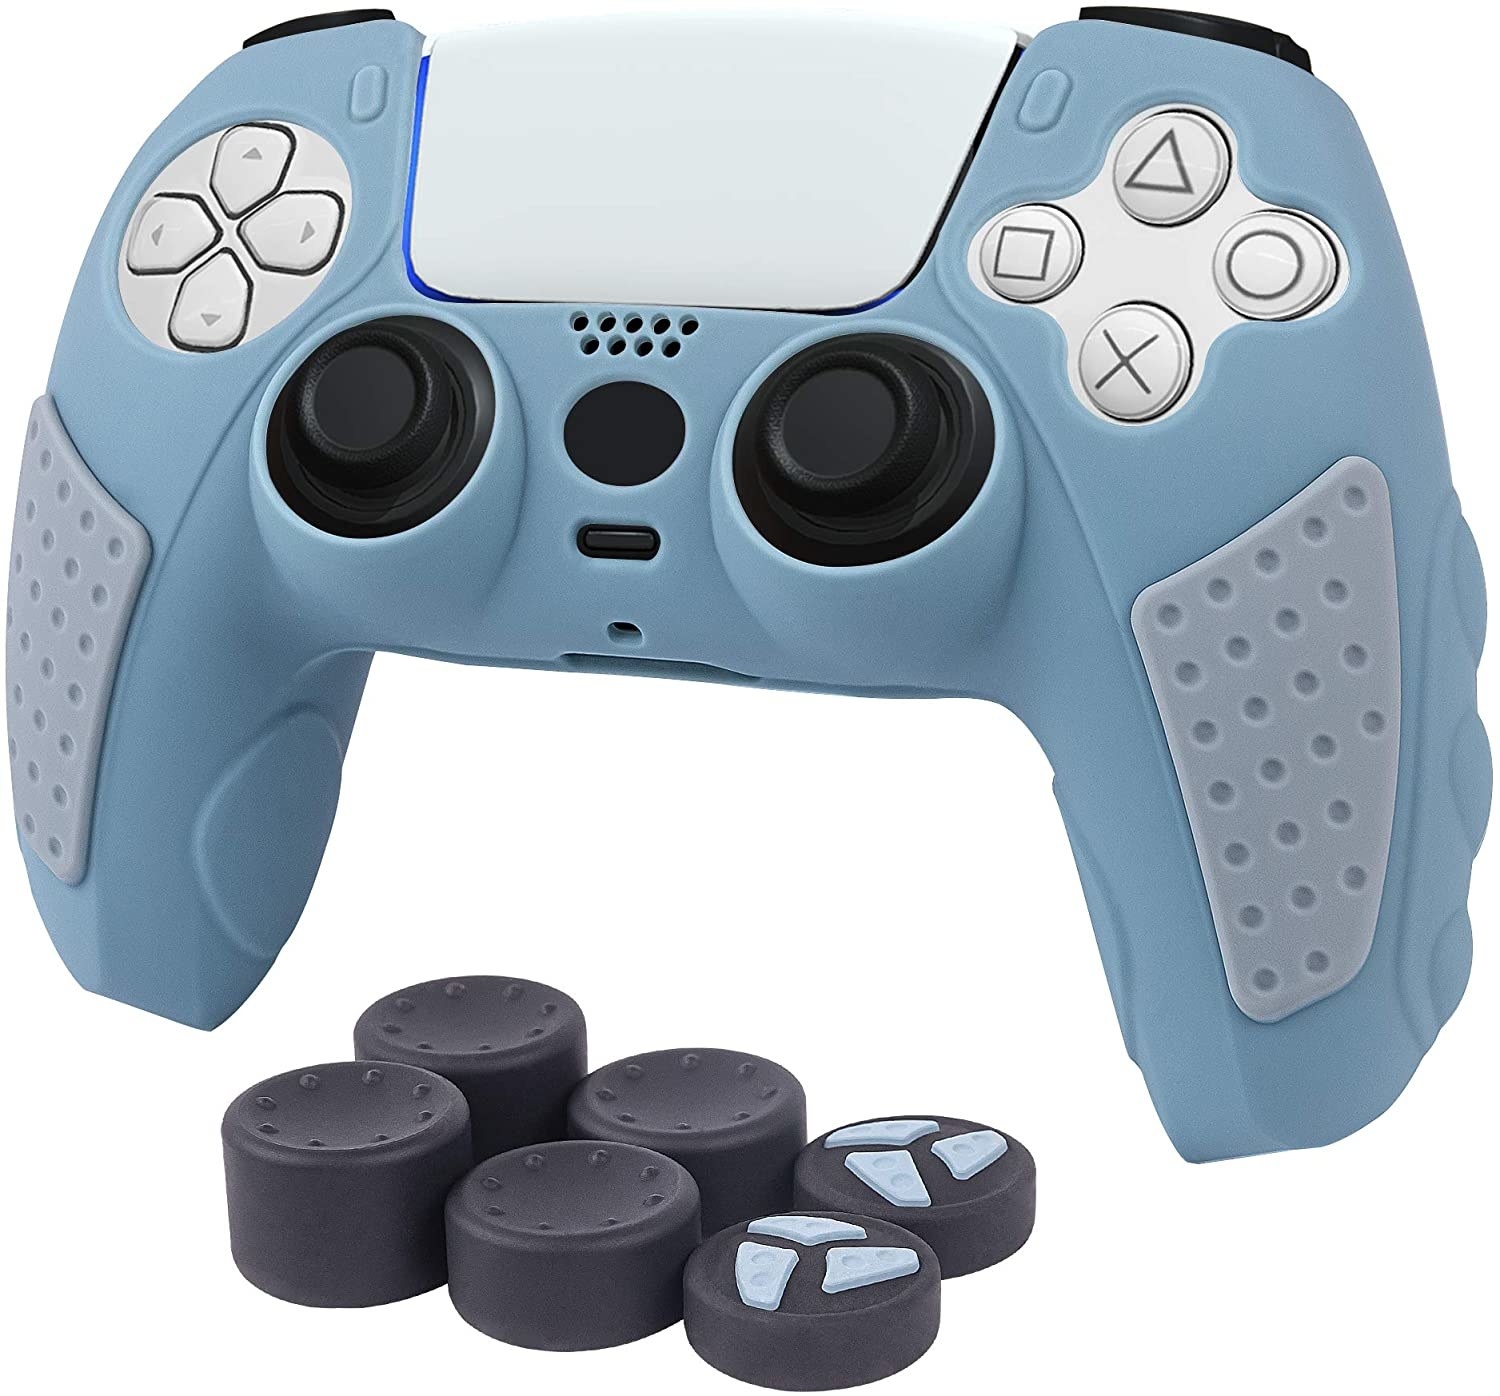 A controller with a latex skin on it